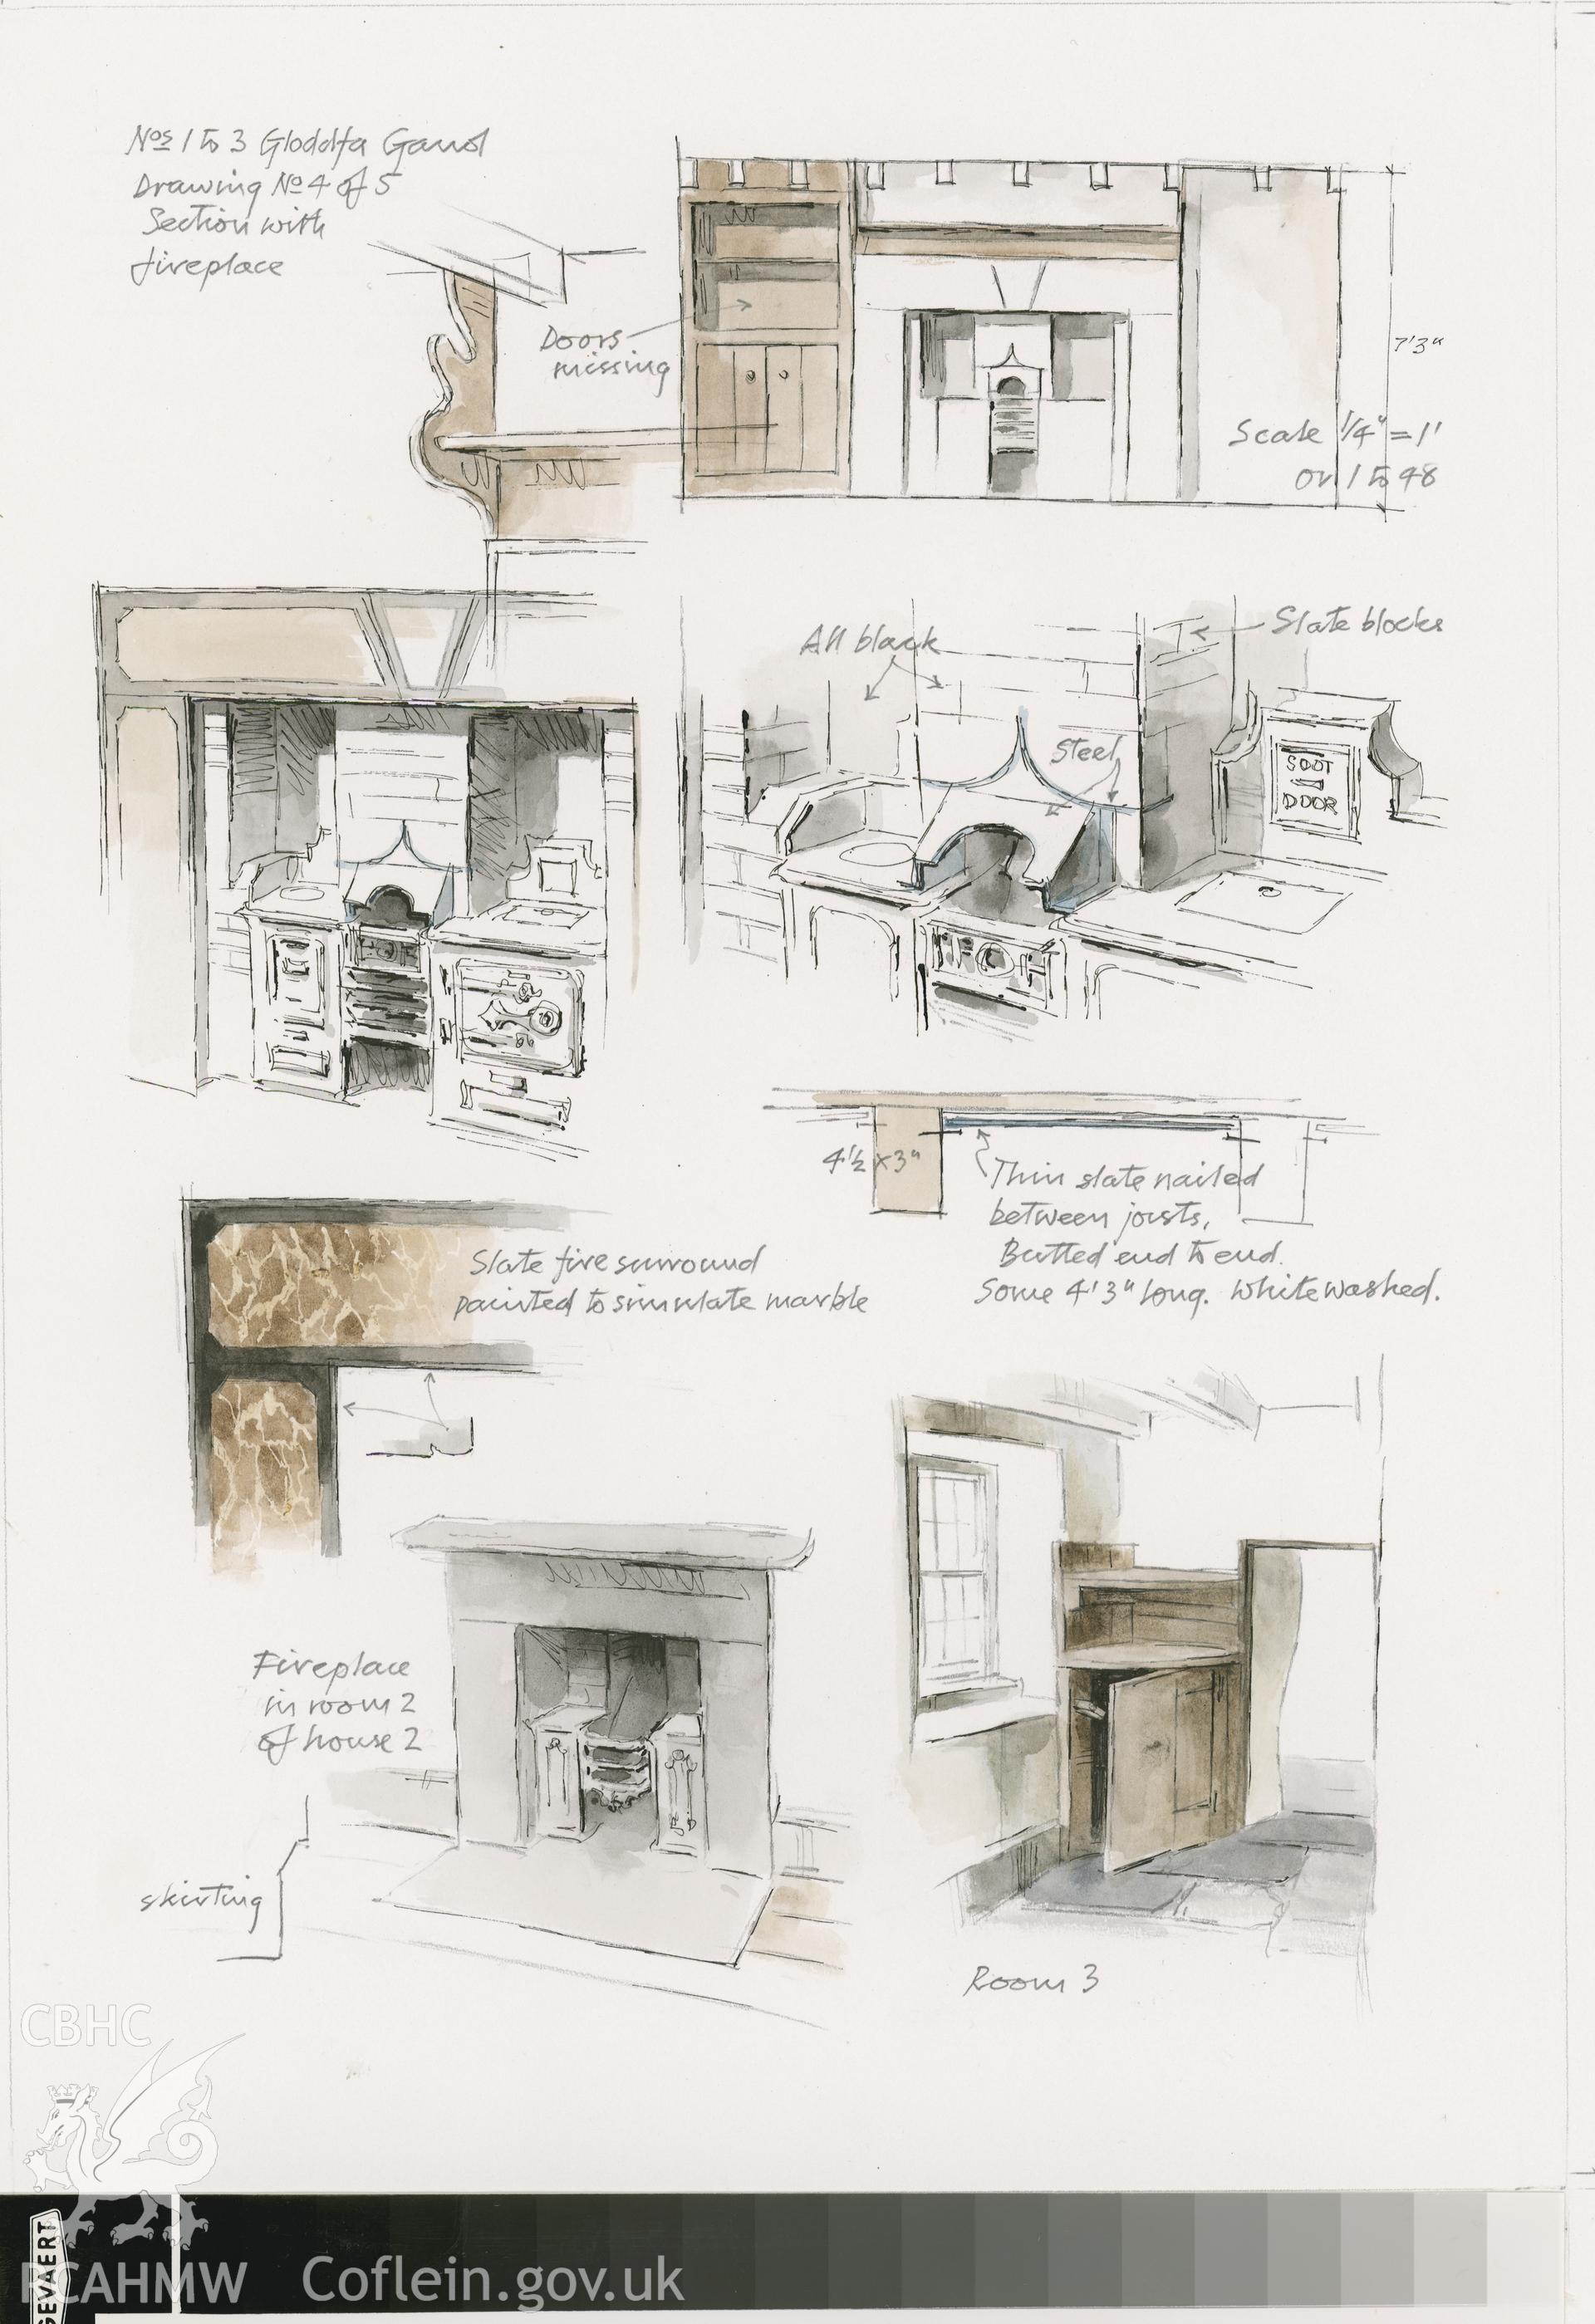 Gloddfa Ganol Cottages - Section of No. 4, looking to Fireplace: (pencil, ink and watercolour) drawing.